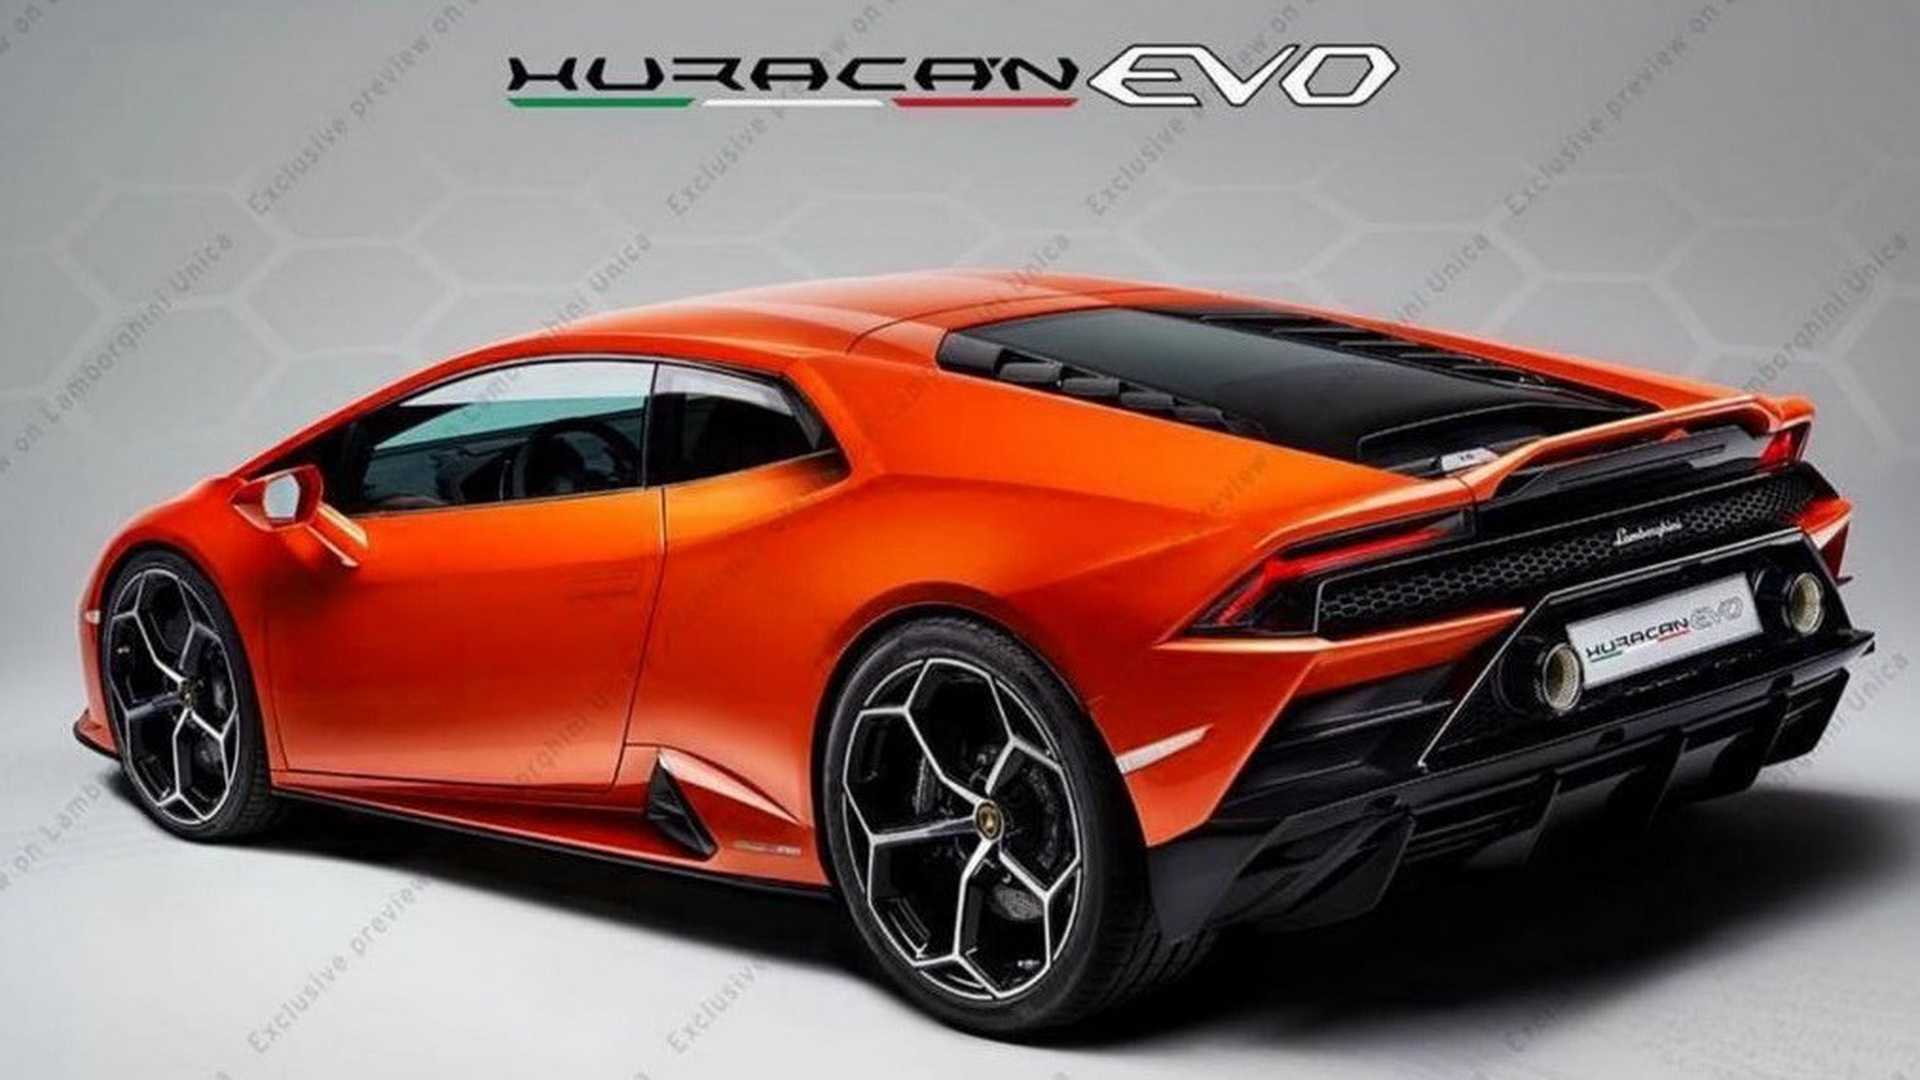 Lamborghini Huracan Evo First Official Image Released